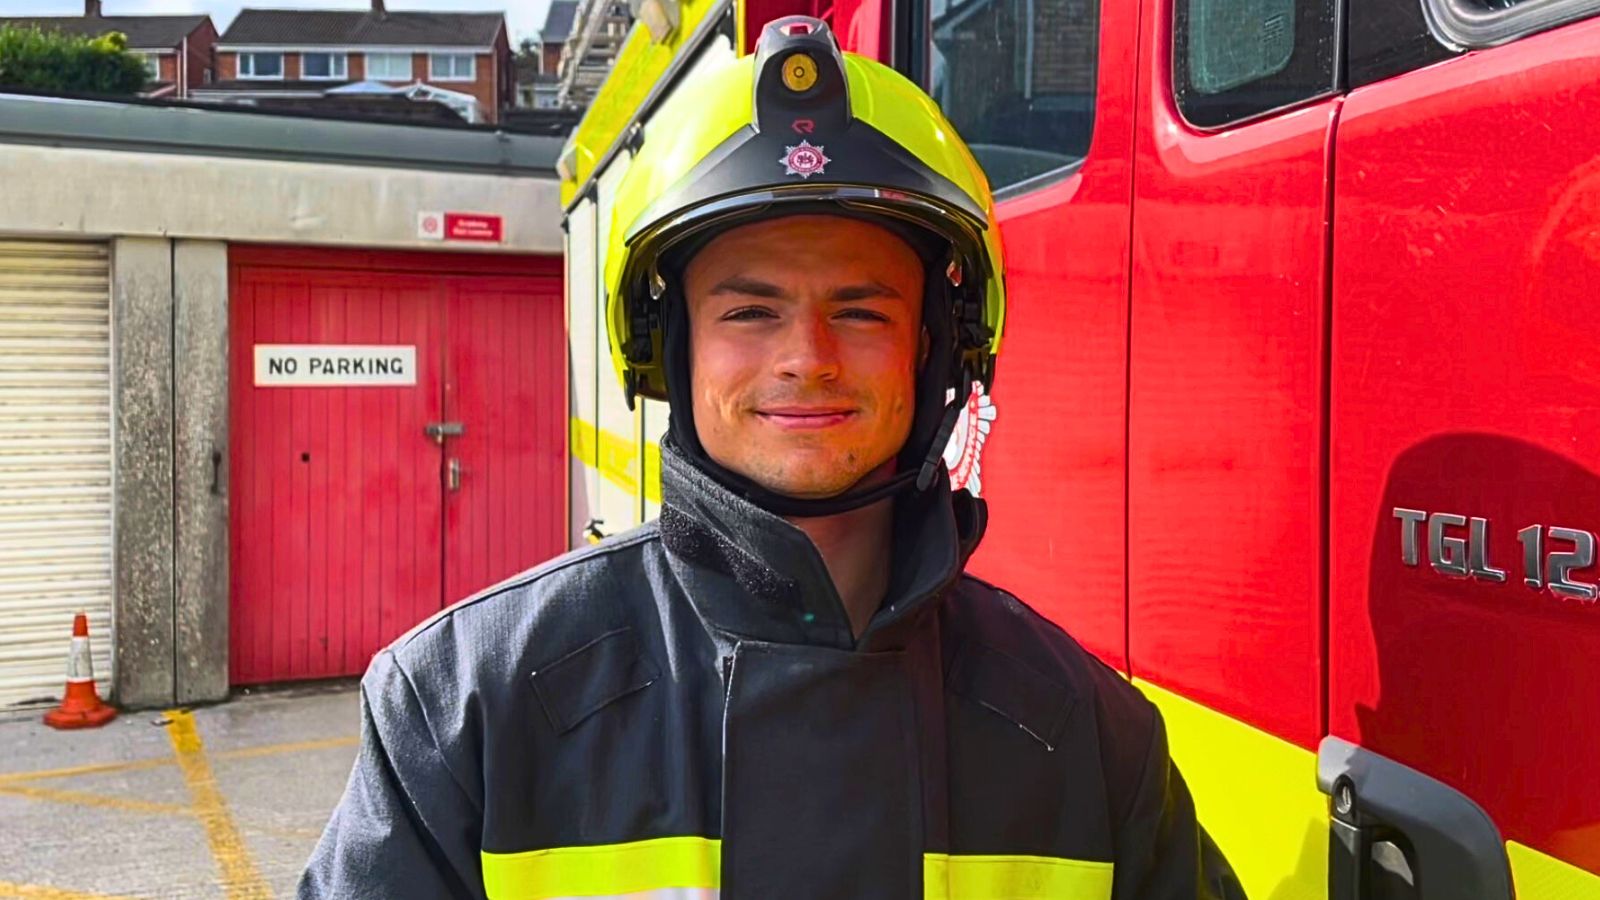 Firefighter, Ben Riddle from the Devon & Somerset Fire & Rescue Service